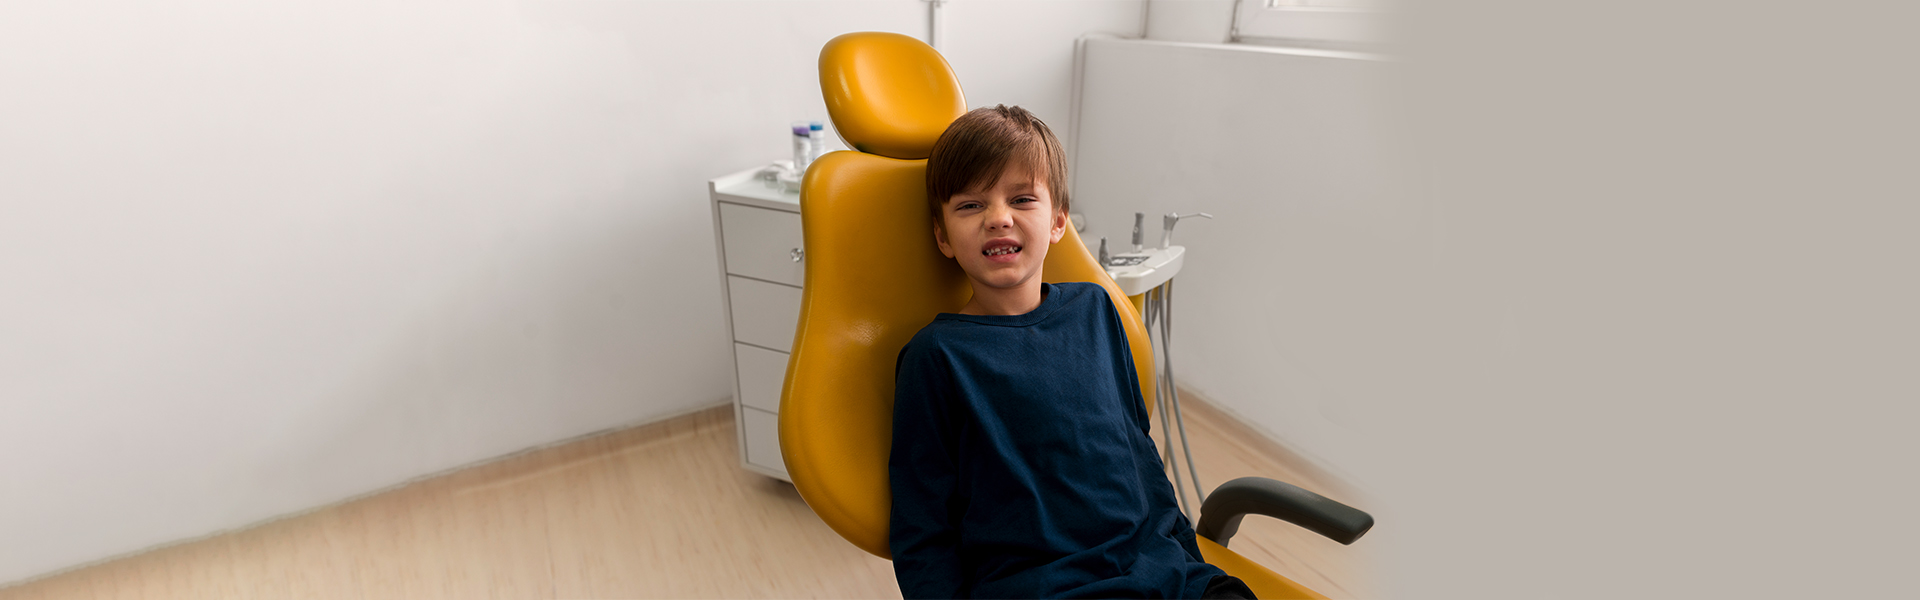 Preventing Cavities in Childhood